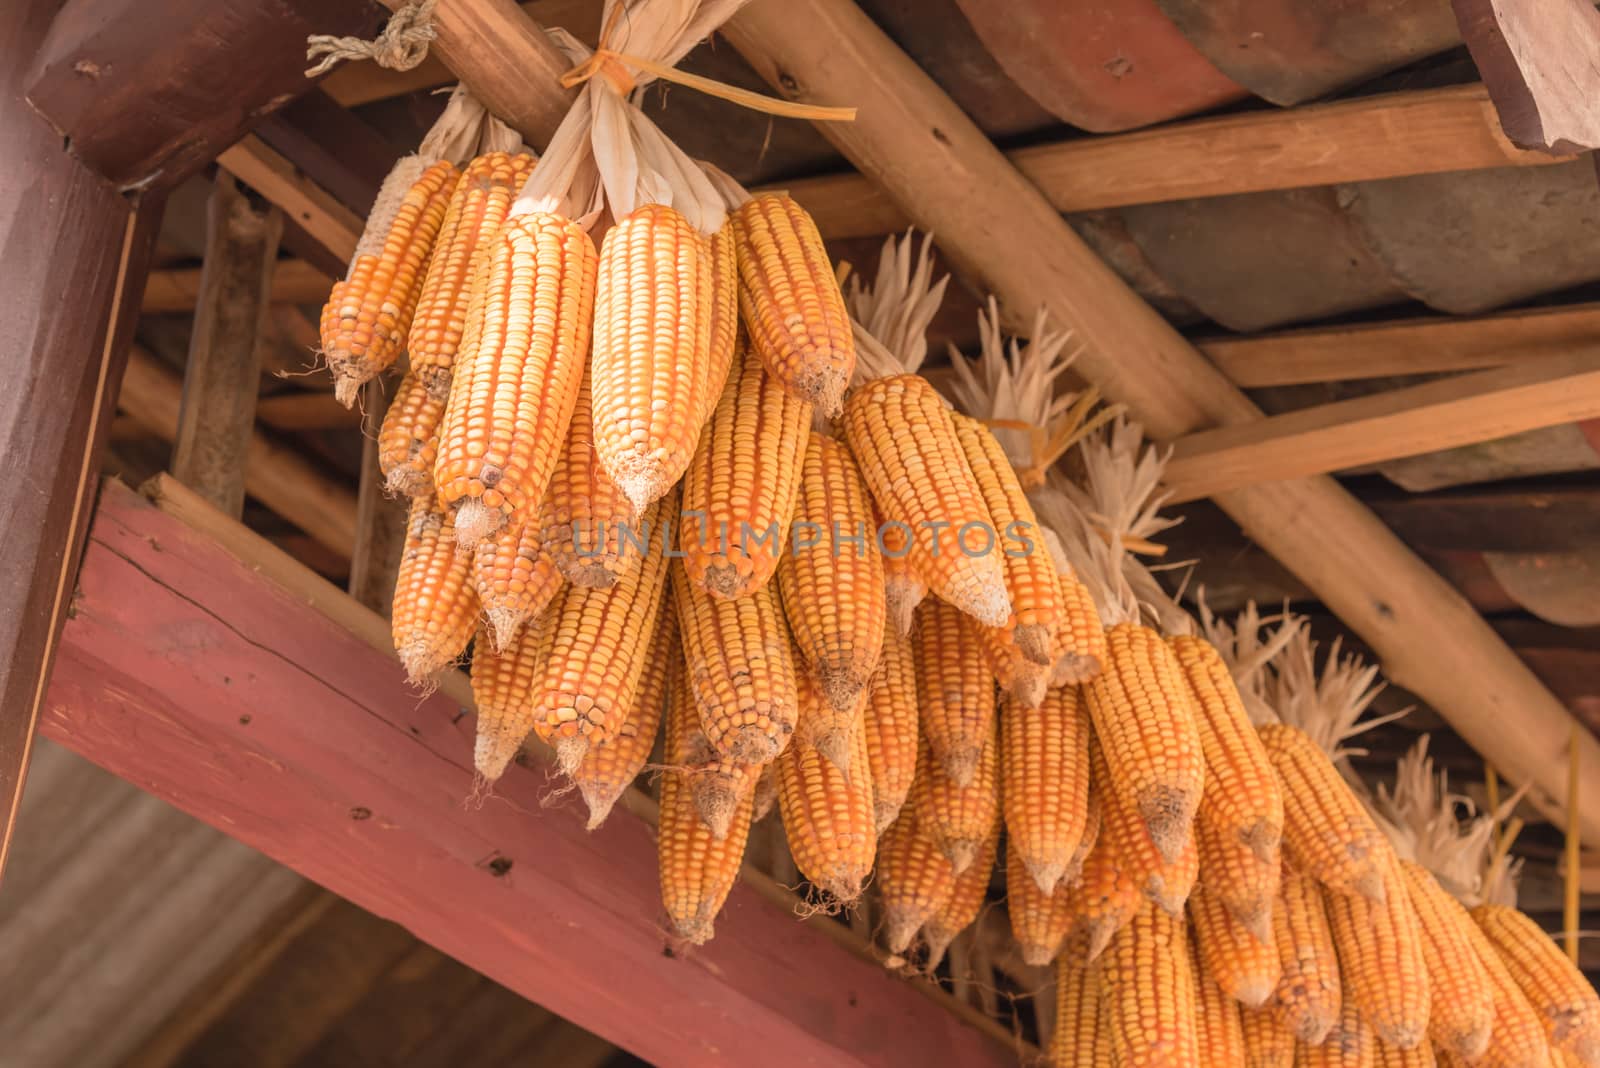 Strings of dried corn on cob hanging from rafters of local timber home in North Vietnam. Peeled organic corn drying inside a barn outbuilding at rural village